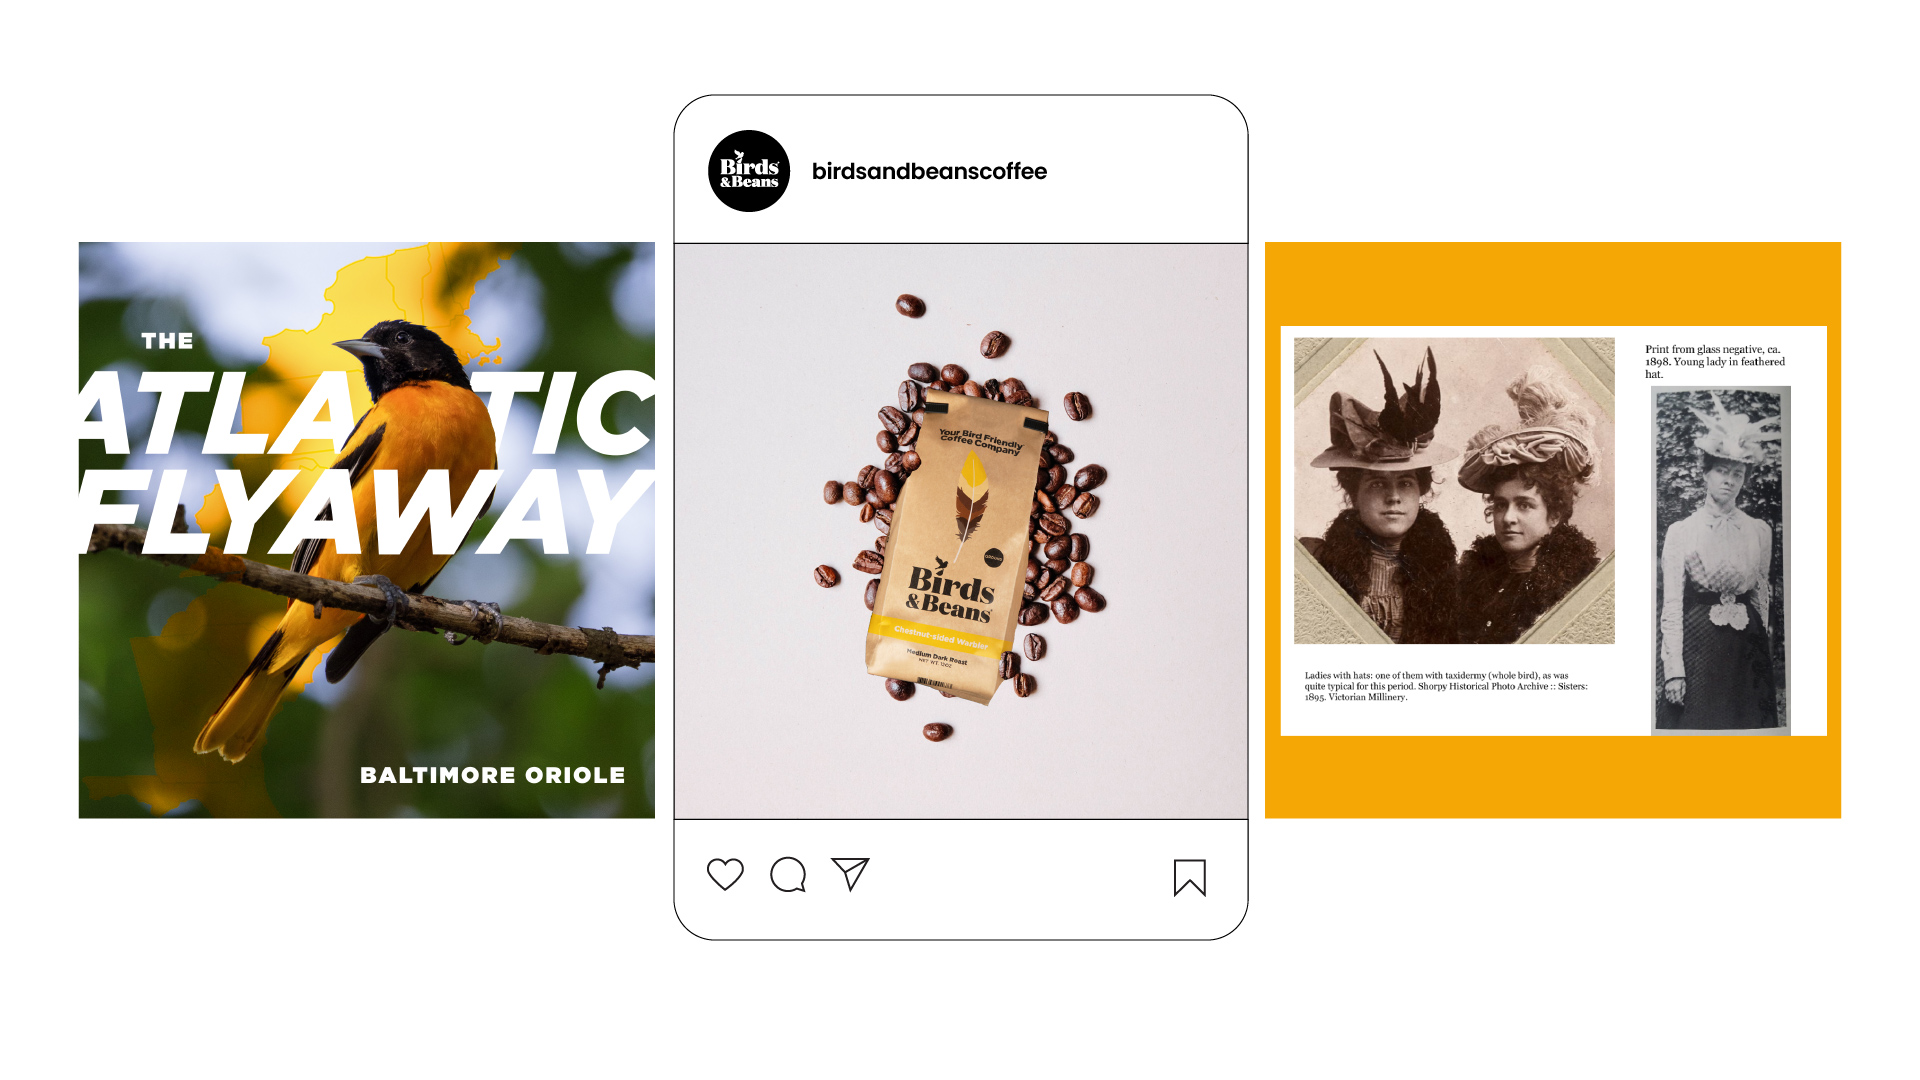 The colors of the bags inspire the colors in images. The first social post shows the Baltimore Oriole with its signature yellow belly. The second post is the Baltimore Oriole bag with a yellow stripe around it. The third post features women in history praised for their conservation efforts.